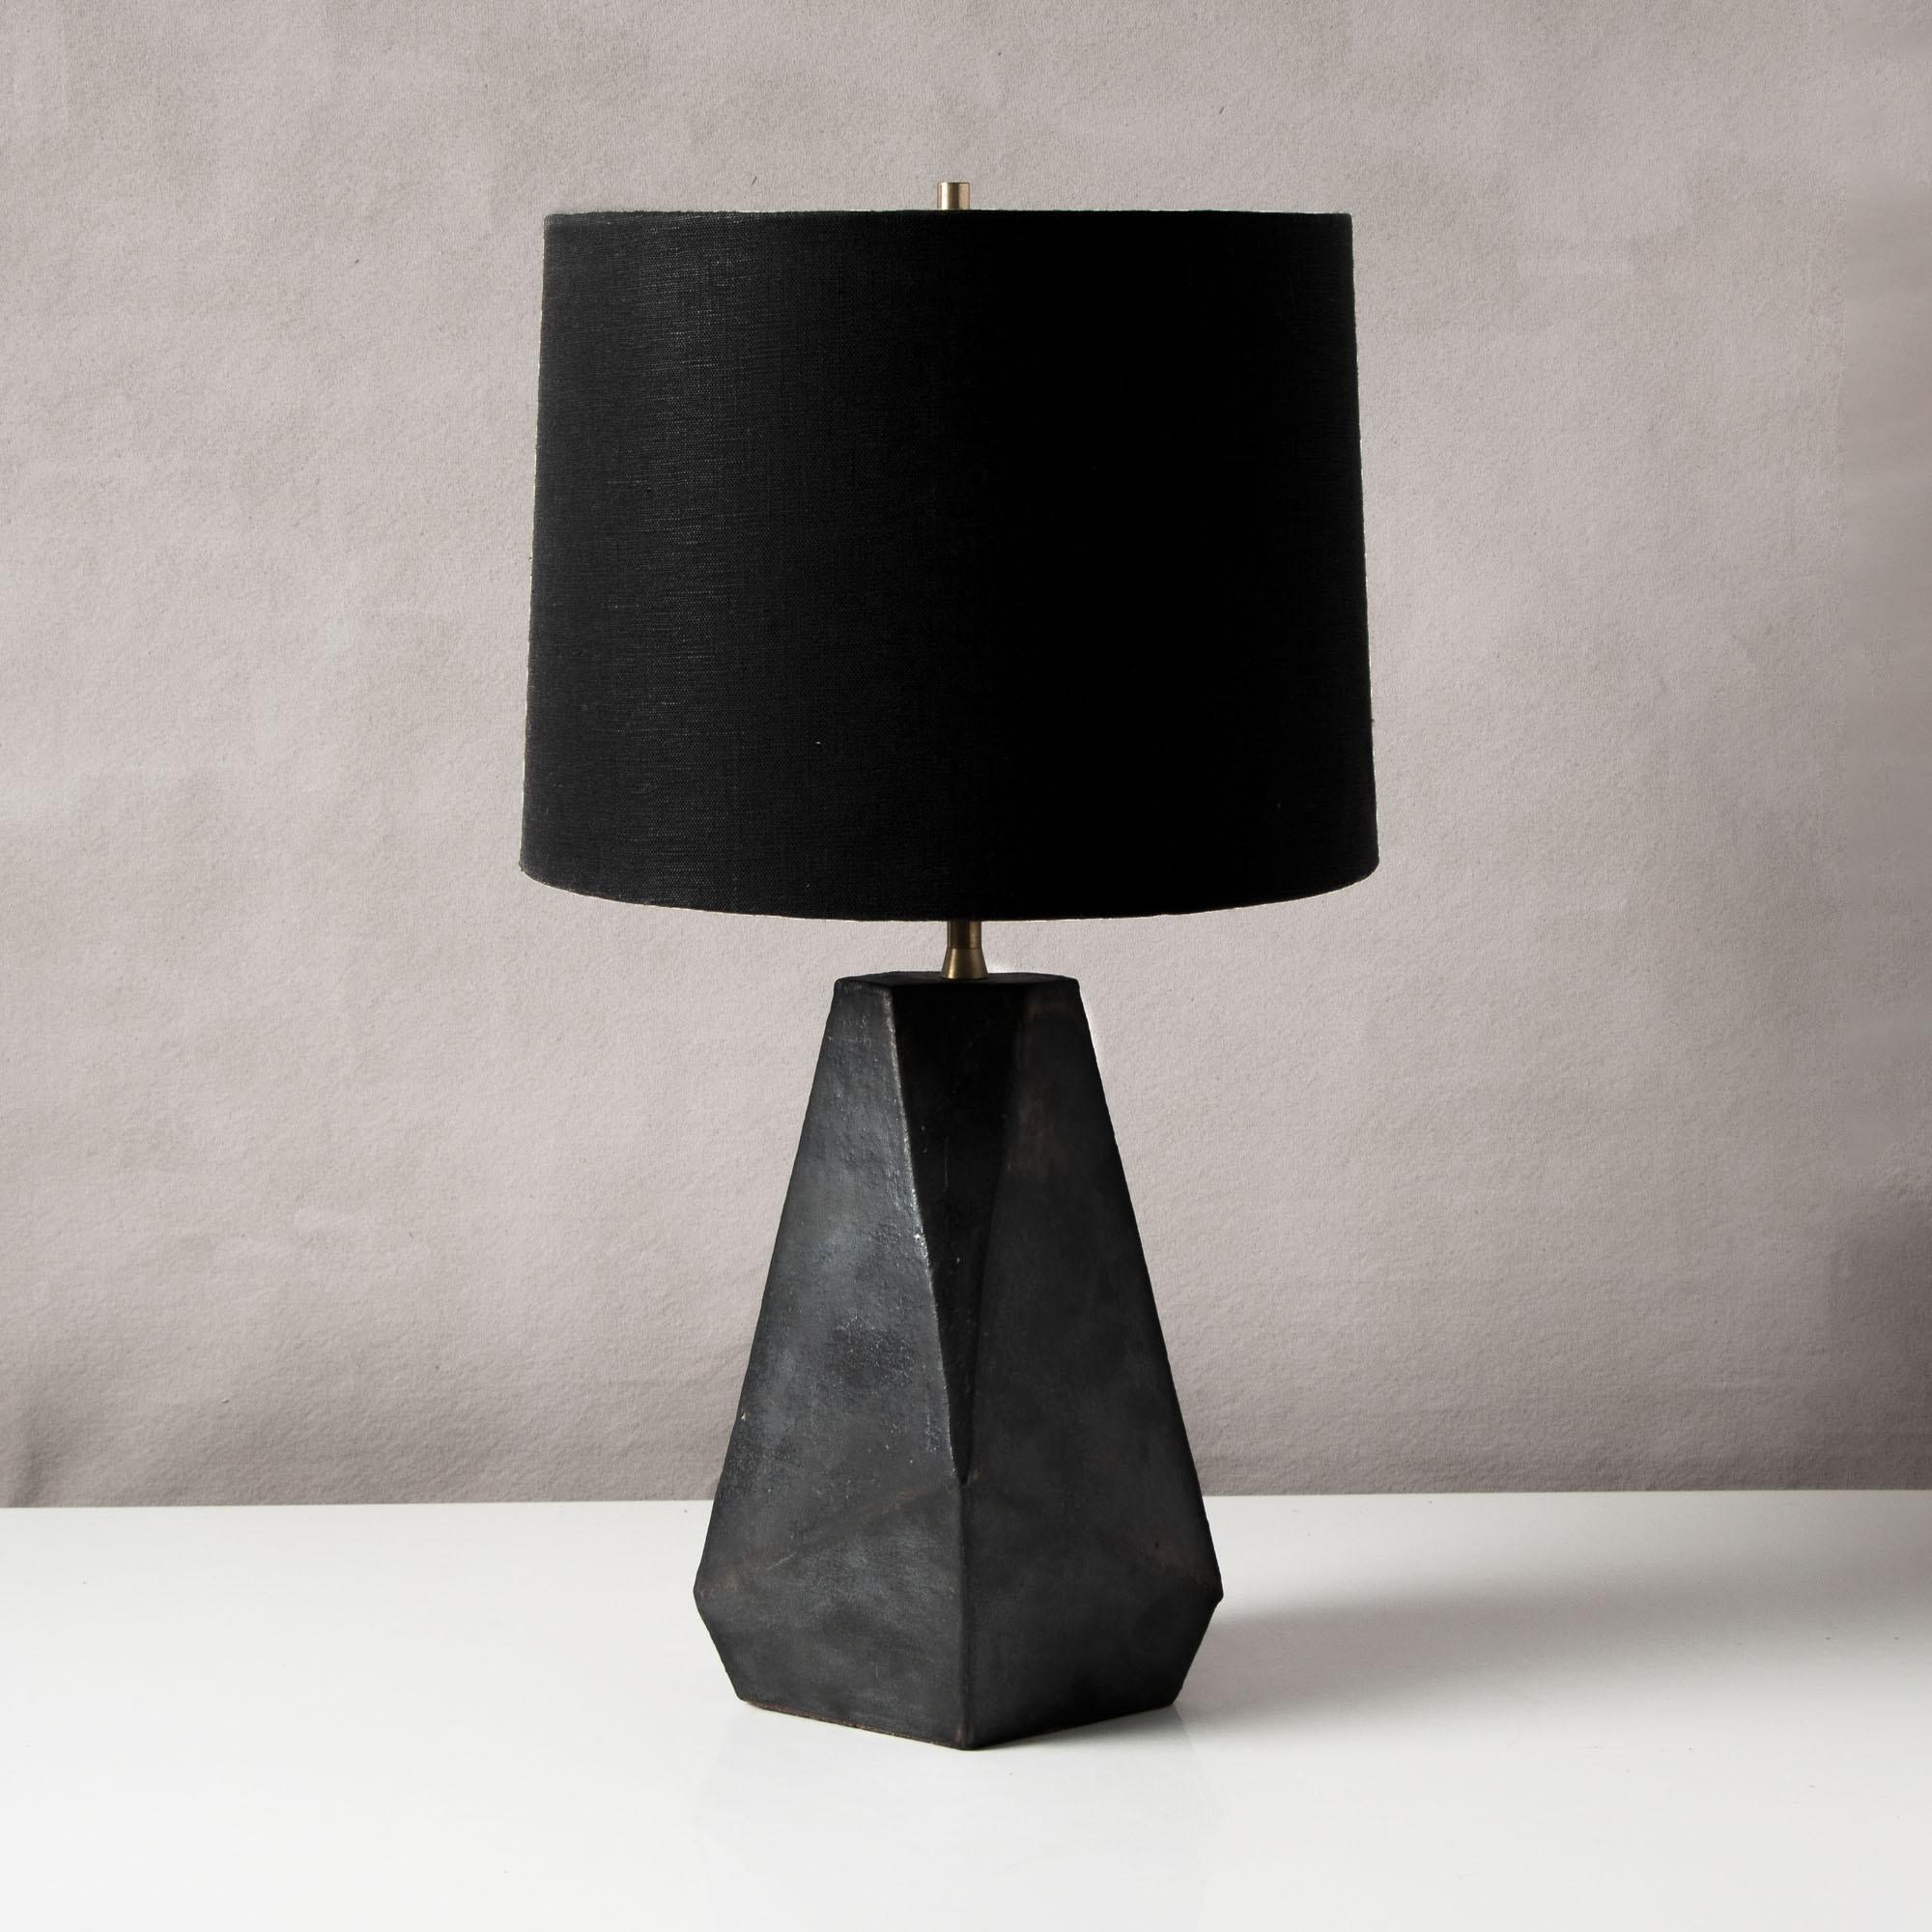 Inspired by midcentury Brutalist architecture, this tapered ceramic table lamp base combines clean geometric lines with the warmth and individuality inherent in handmade work. Each piece is assembled individually from flat sheets of clay, into a